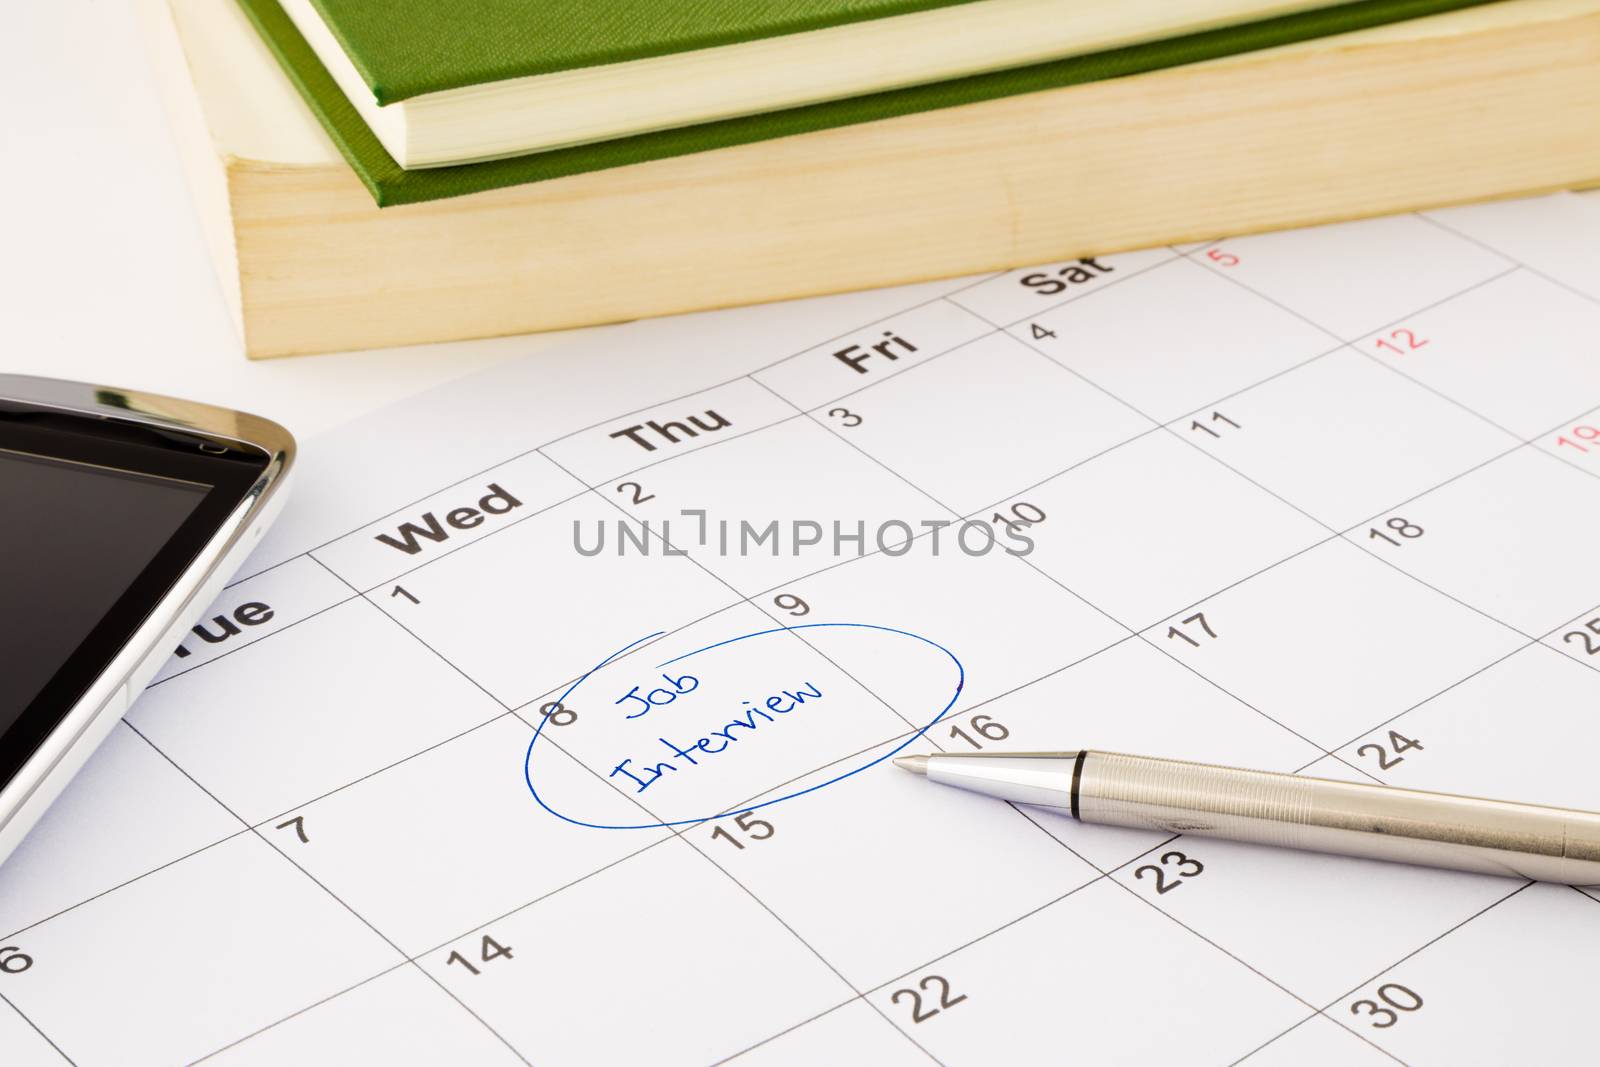 job interview appointment on schedule, recruitment and human resource concepts